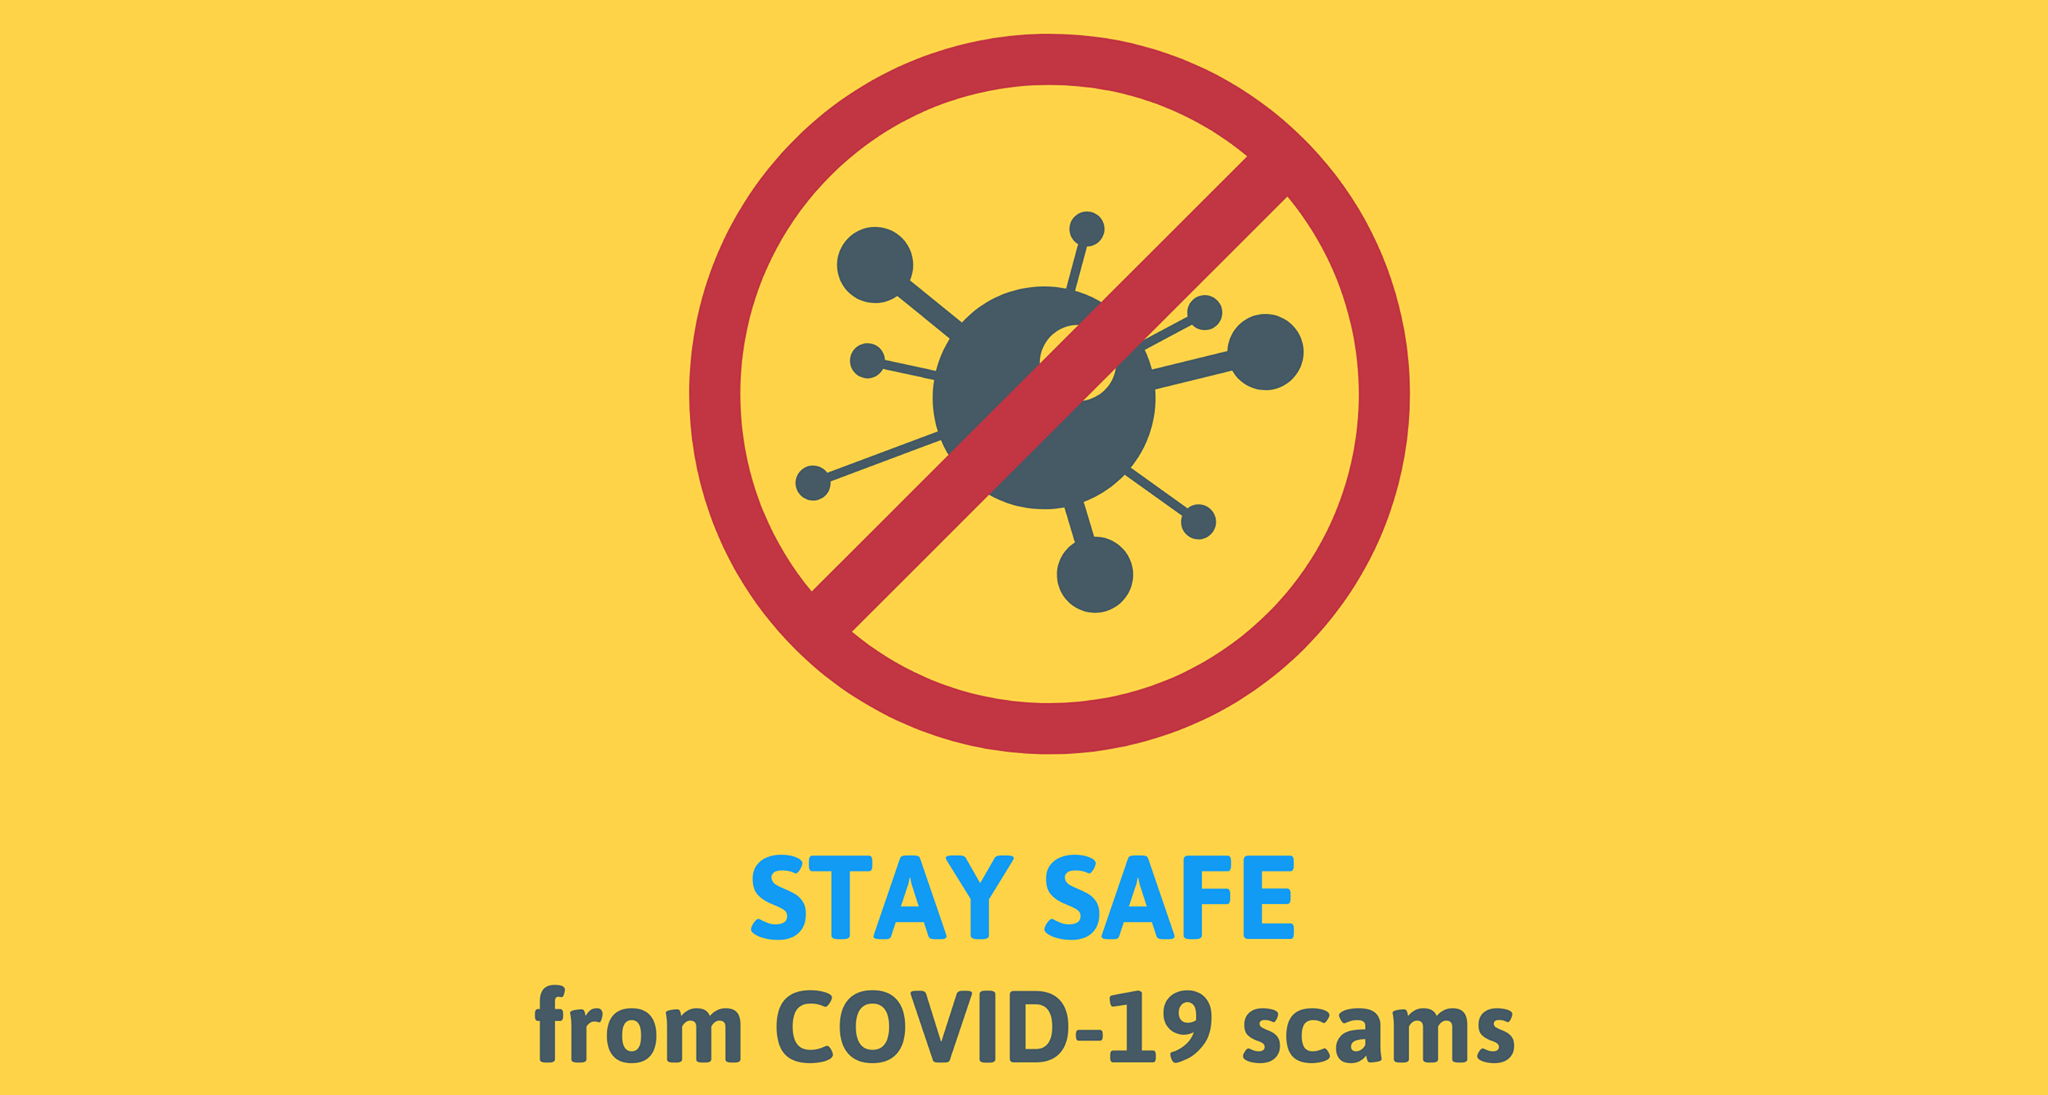 COVID-19 related scams increase by 400%